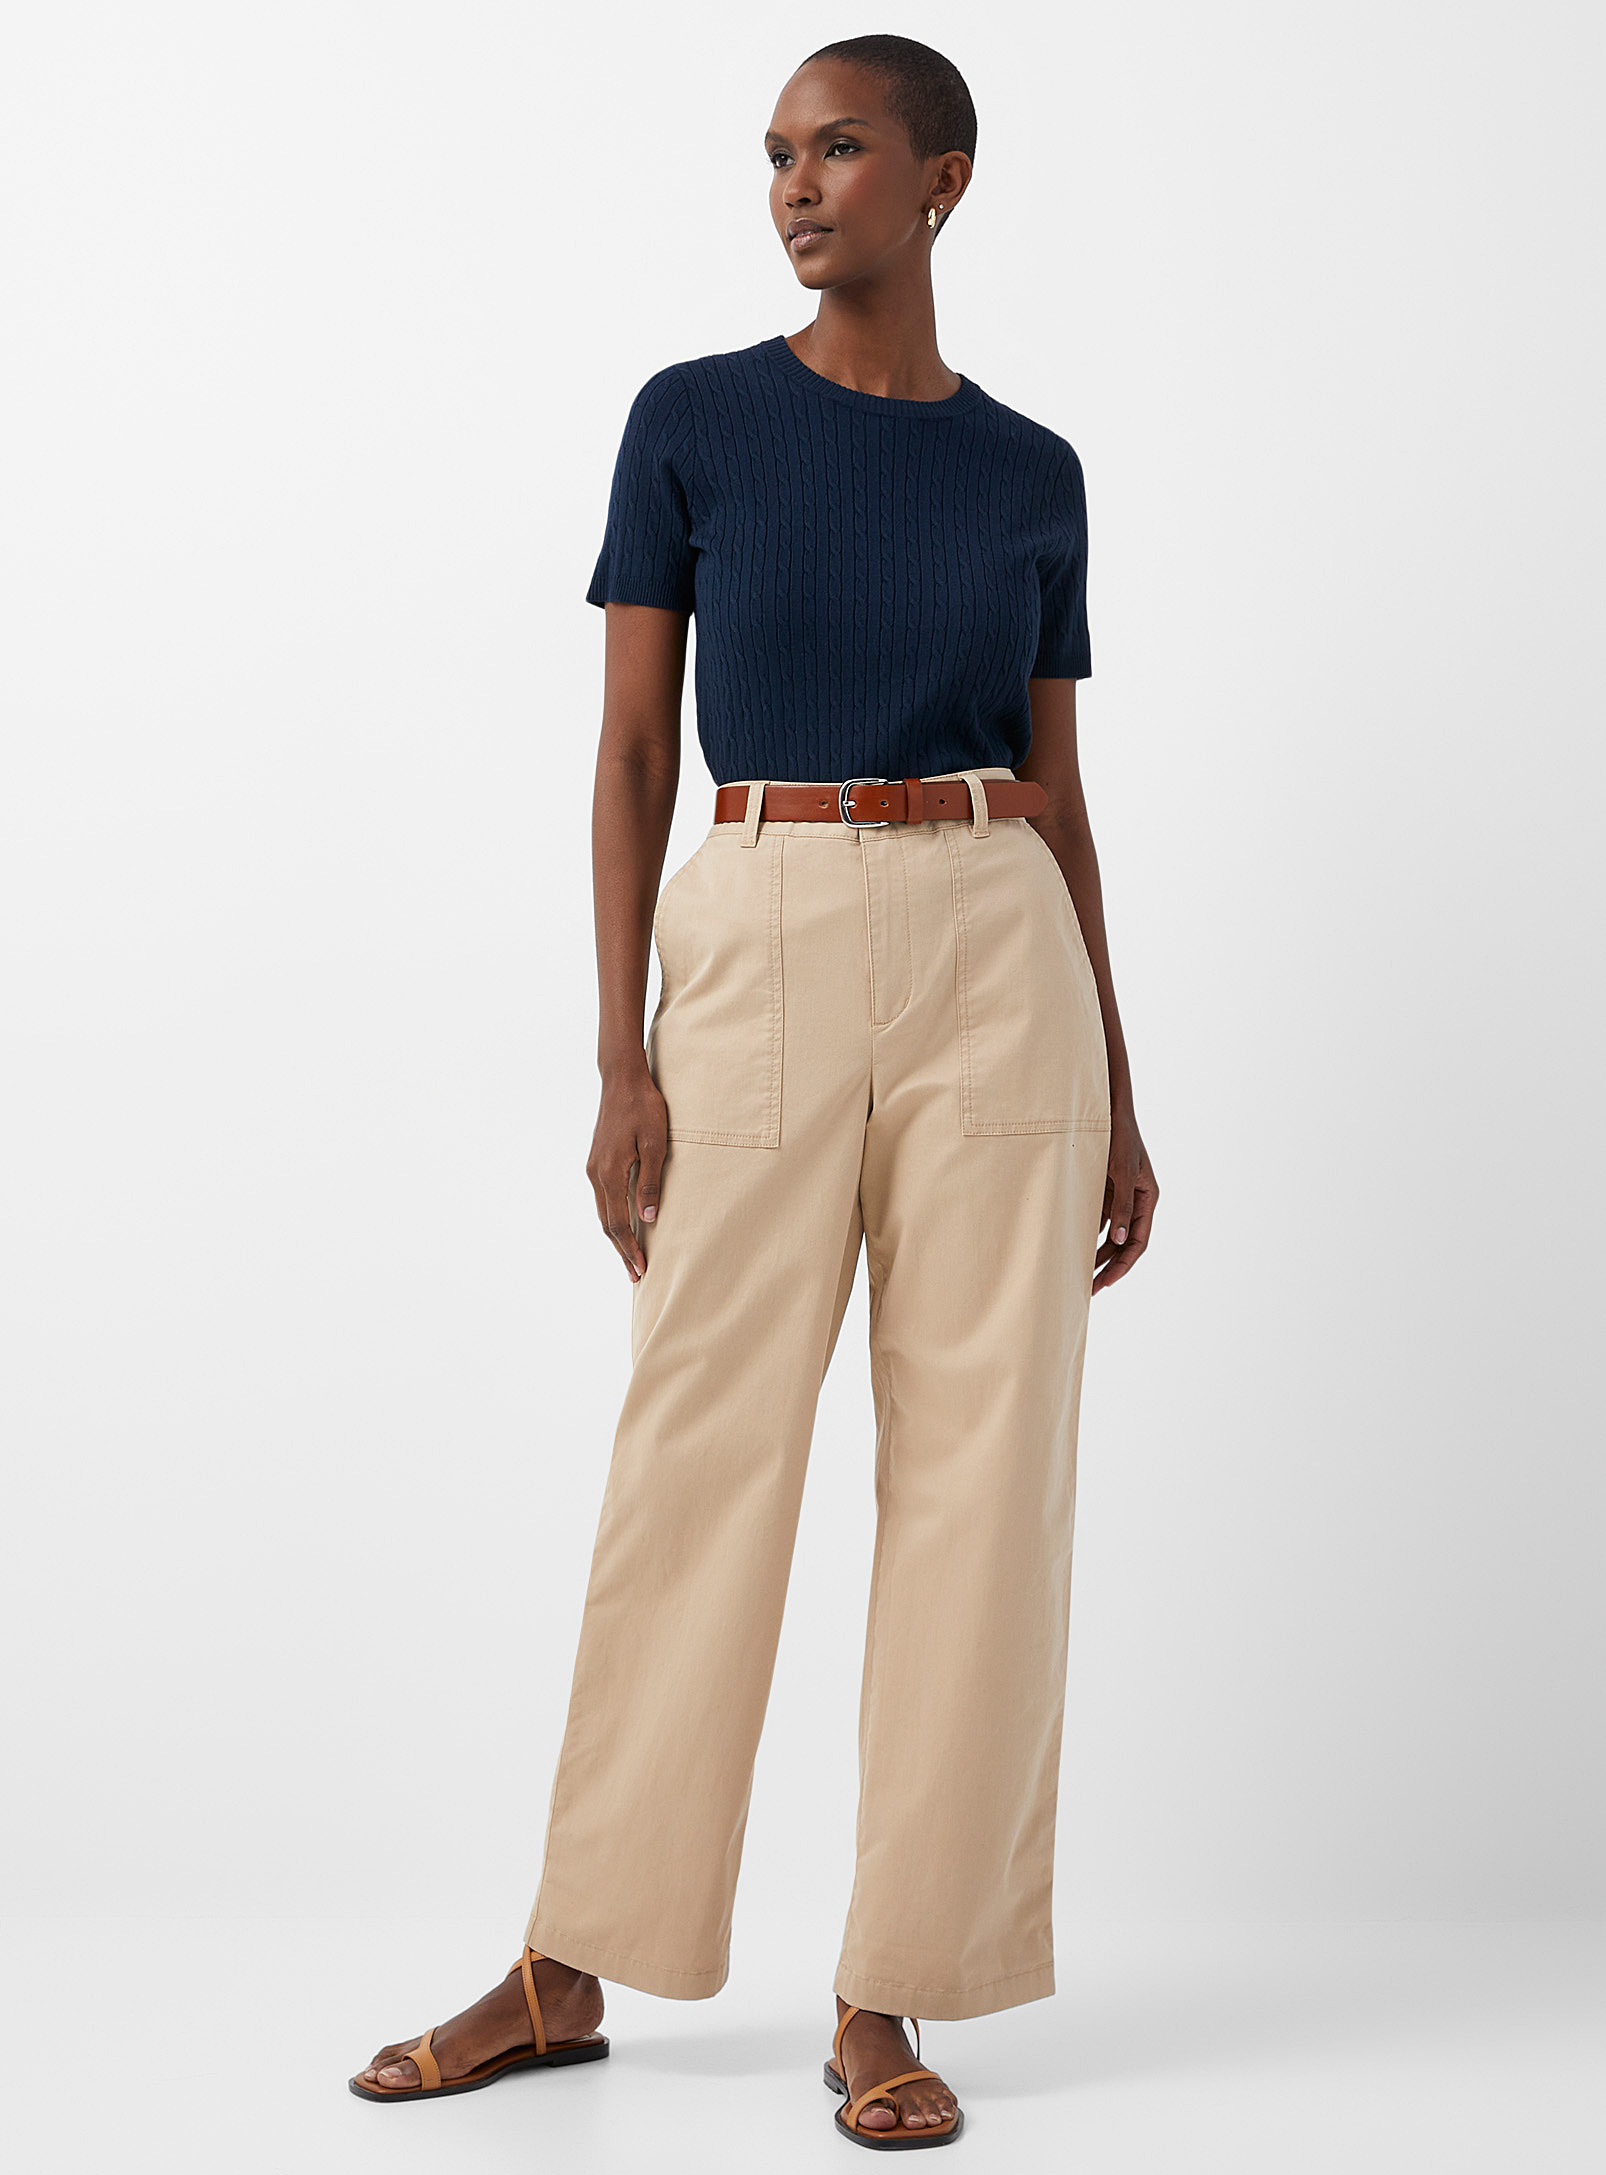 Contemporaine Large Patch Pockets Chino Pant In Sand